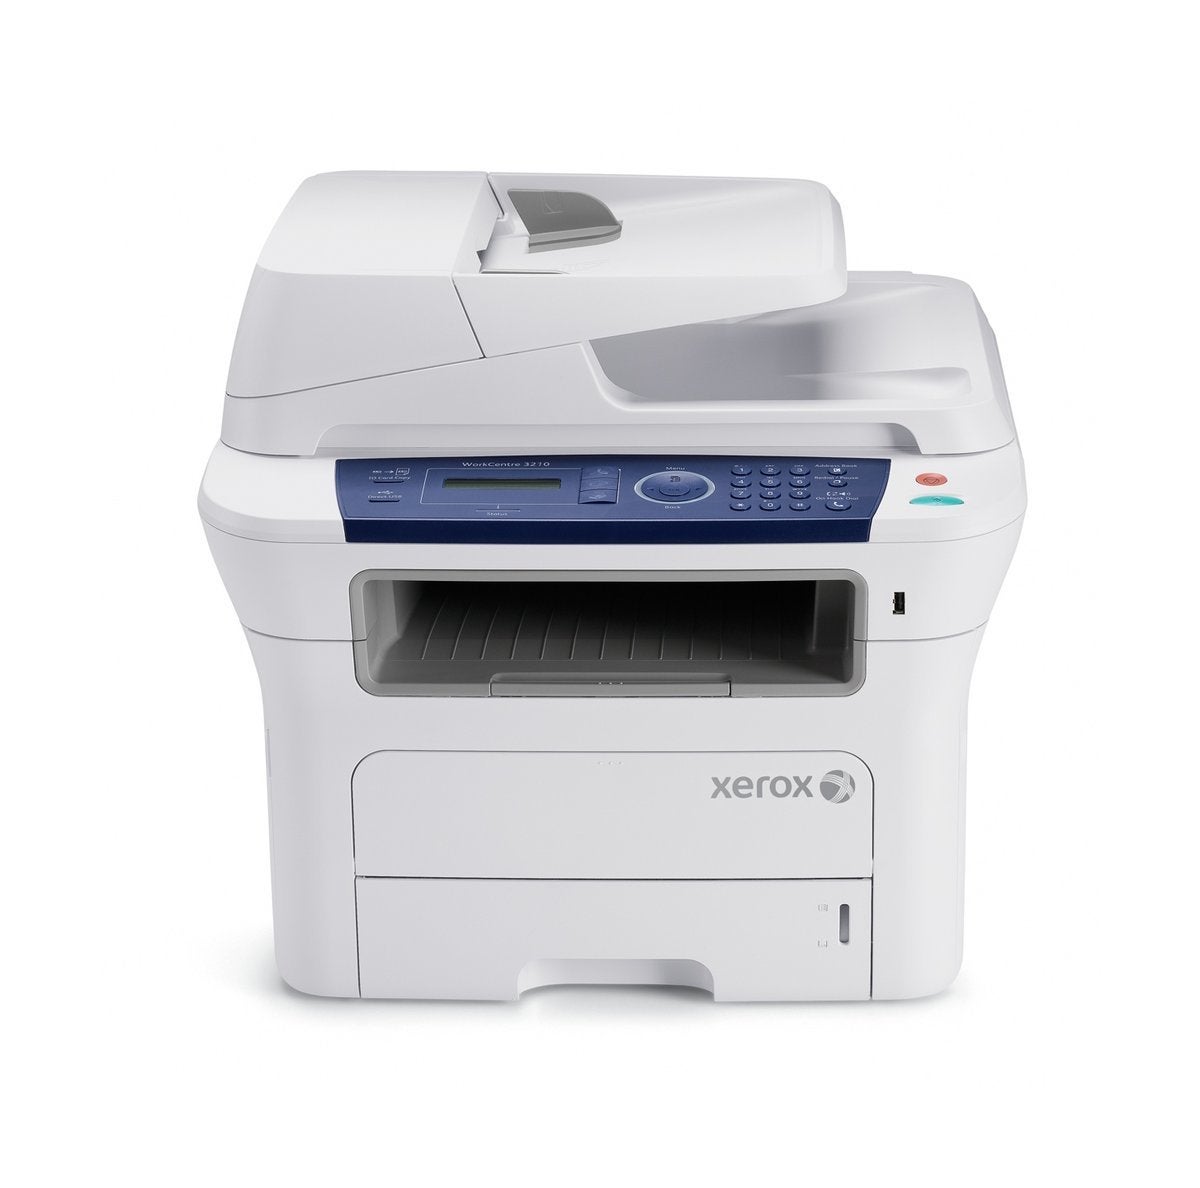 xerox workcentre printer 3210 fuji copier scanner multifunction getprice hp sorry currently unavailable laser